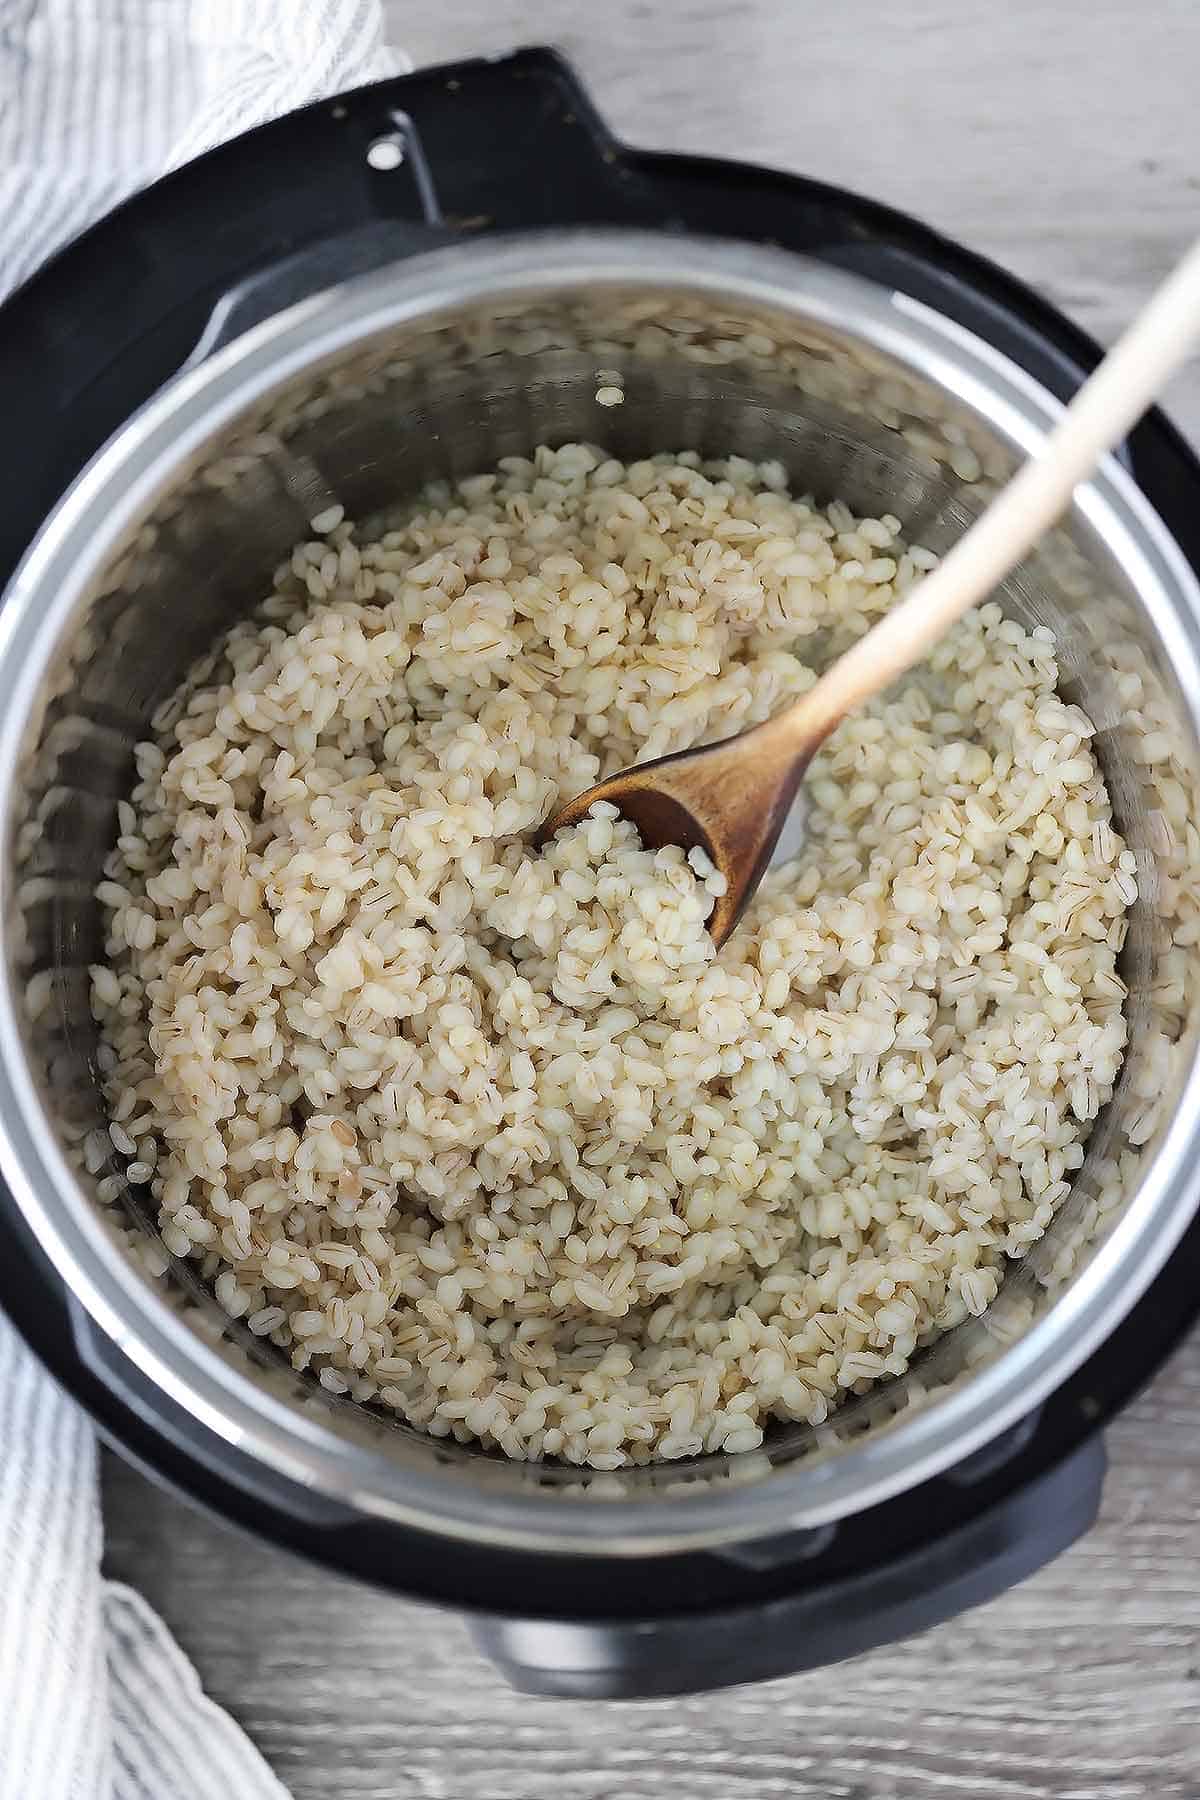 How Long To Cook Barley In Electric Pressure Cooker